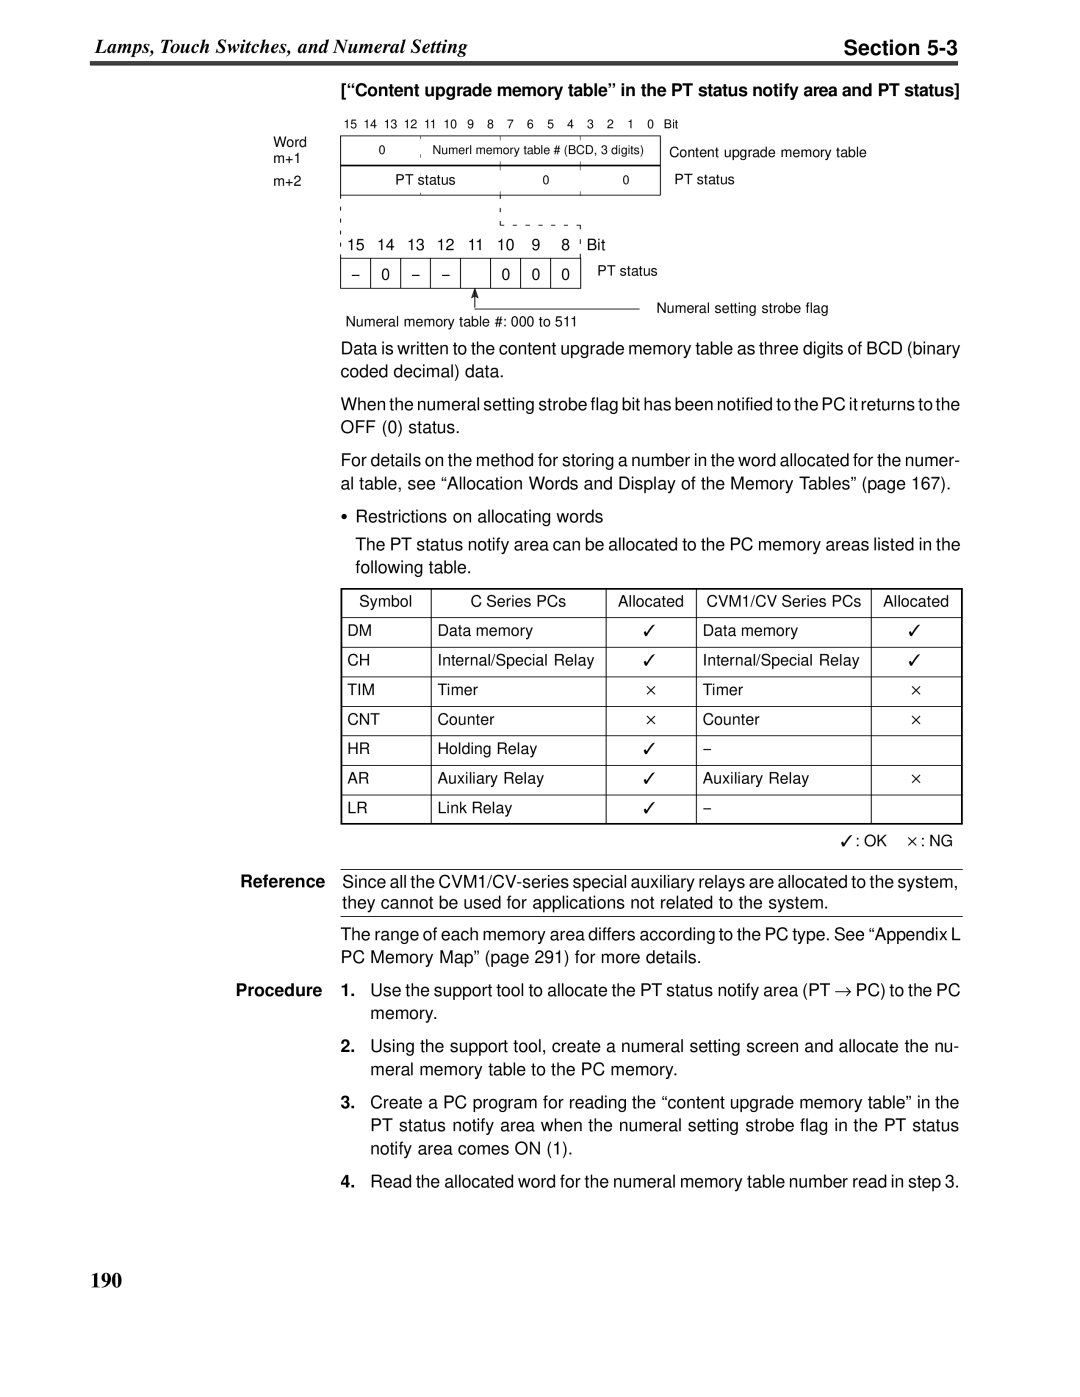 Omron V022-E3-1 operation manual Section, Restrictions on allocating words 